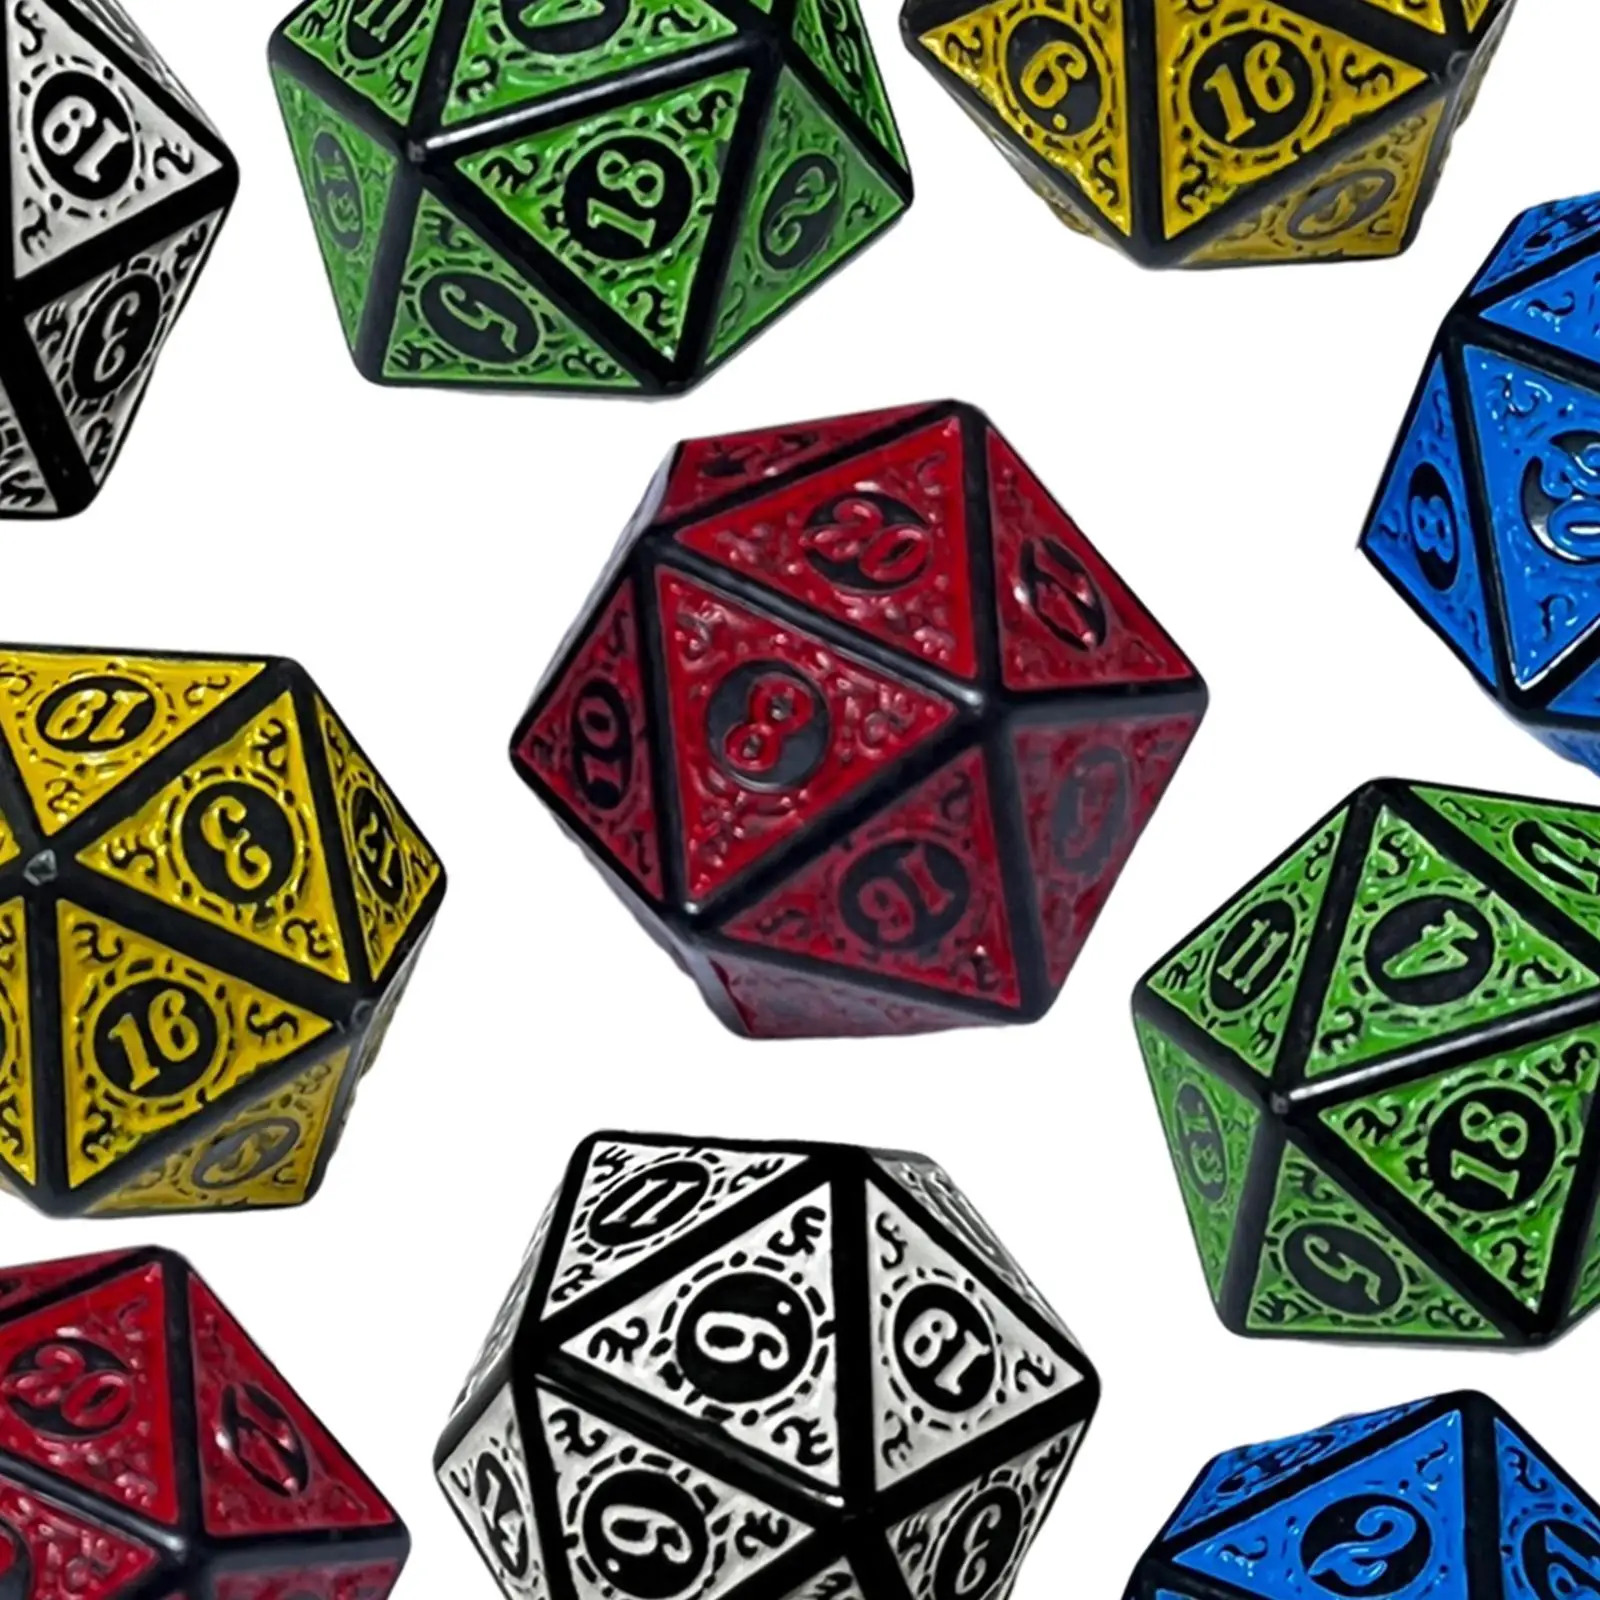 10Pcs Astrology Dice Entertainment Toy Collection Multi Sided Dices Acrylic 20 Sided Dices for Party Toy Role Playing Game